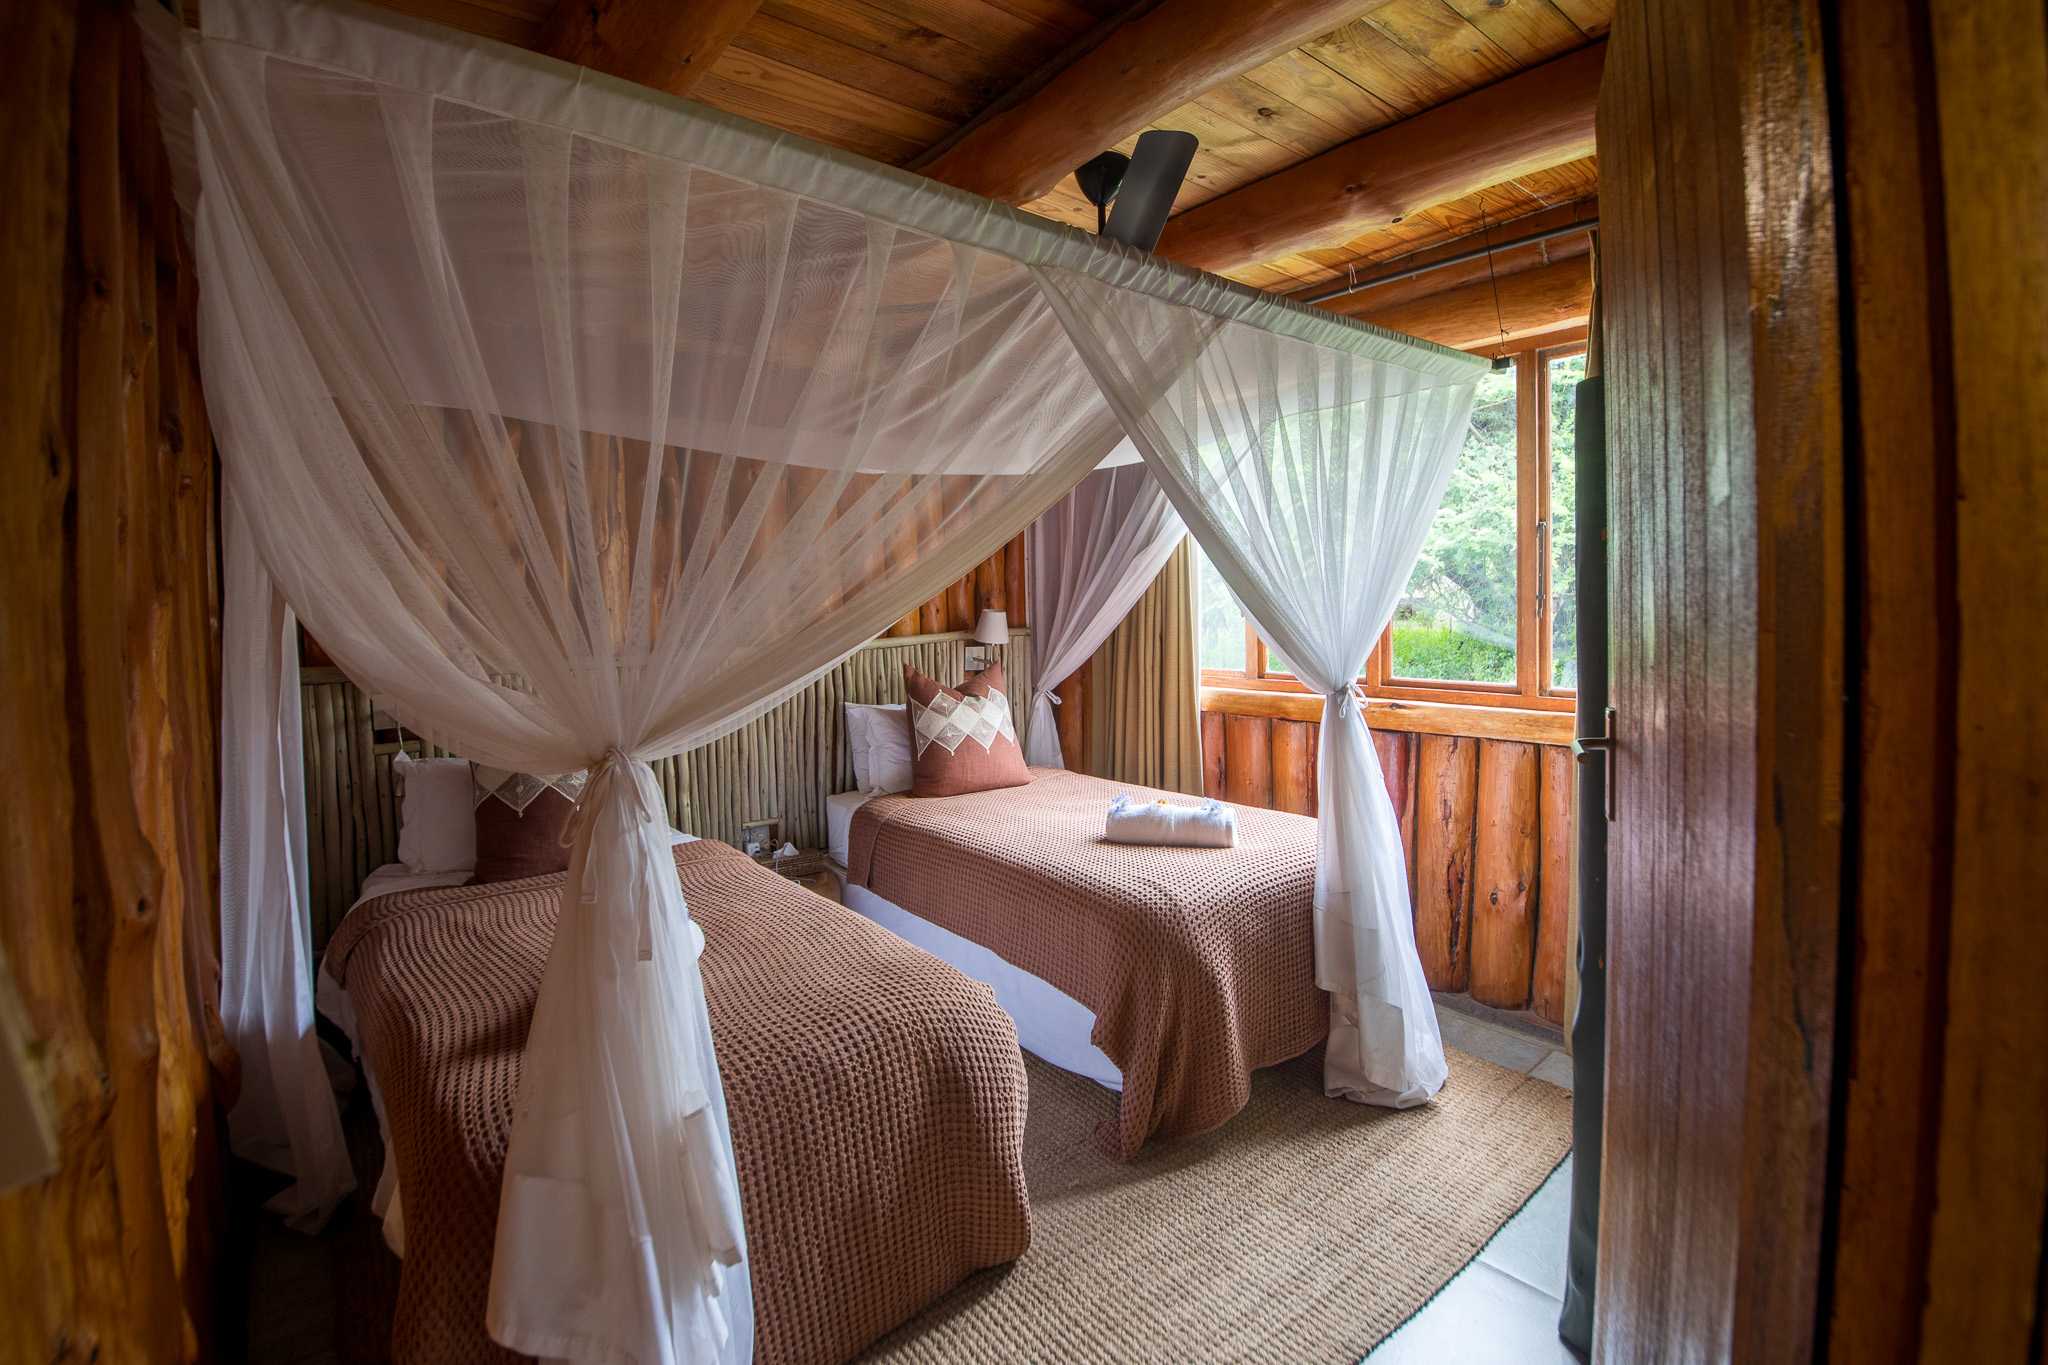 Family Chalet Twin Bedroom at Rhino River Lodge in the Manyoni Private Game Reserve (Zululand Rhino Reserve), KwaZulu-Natal